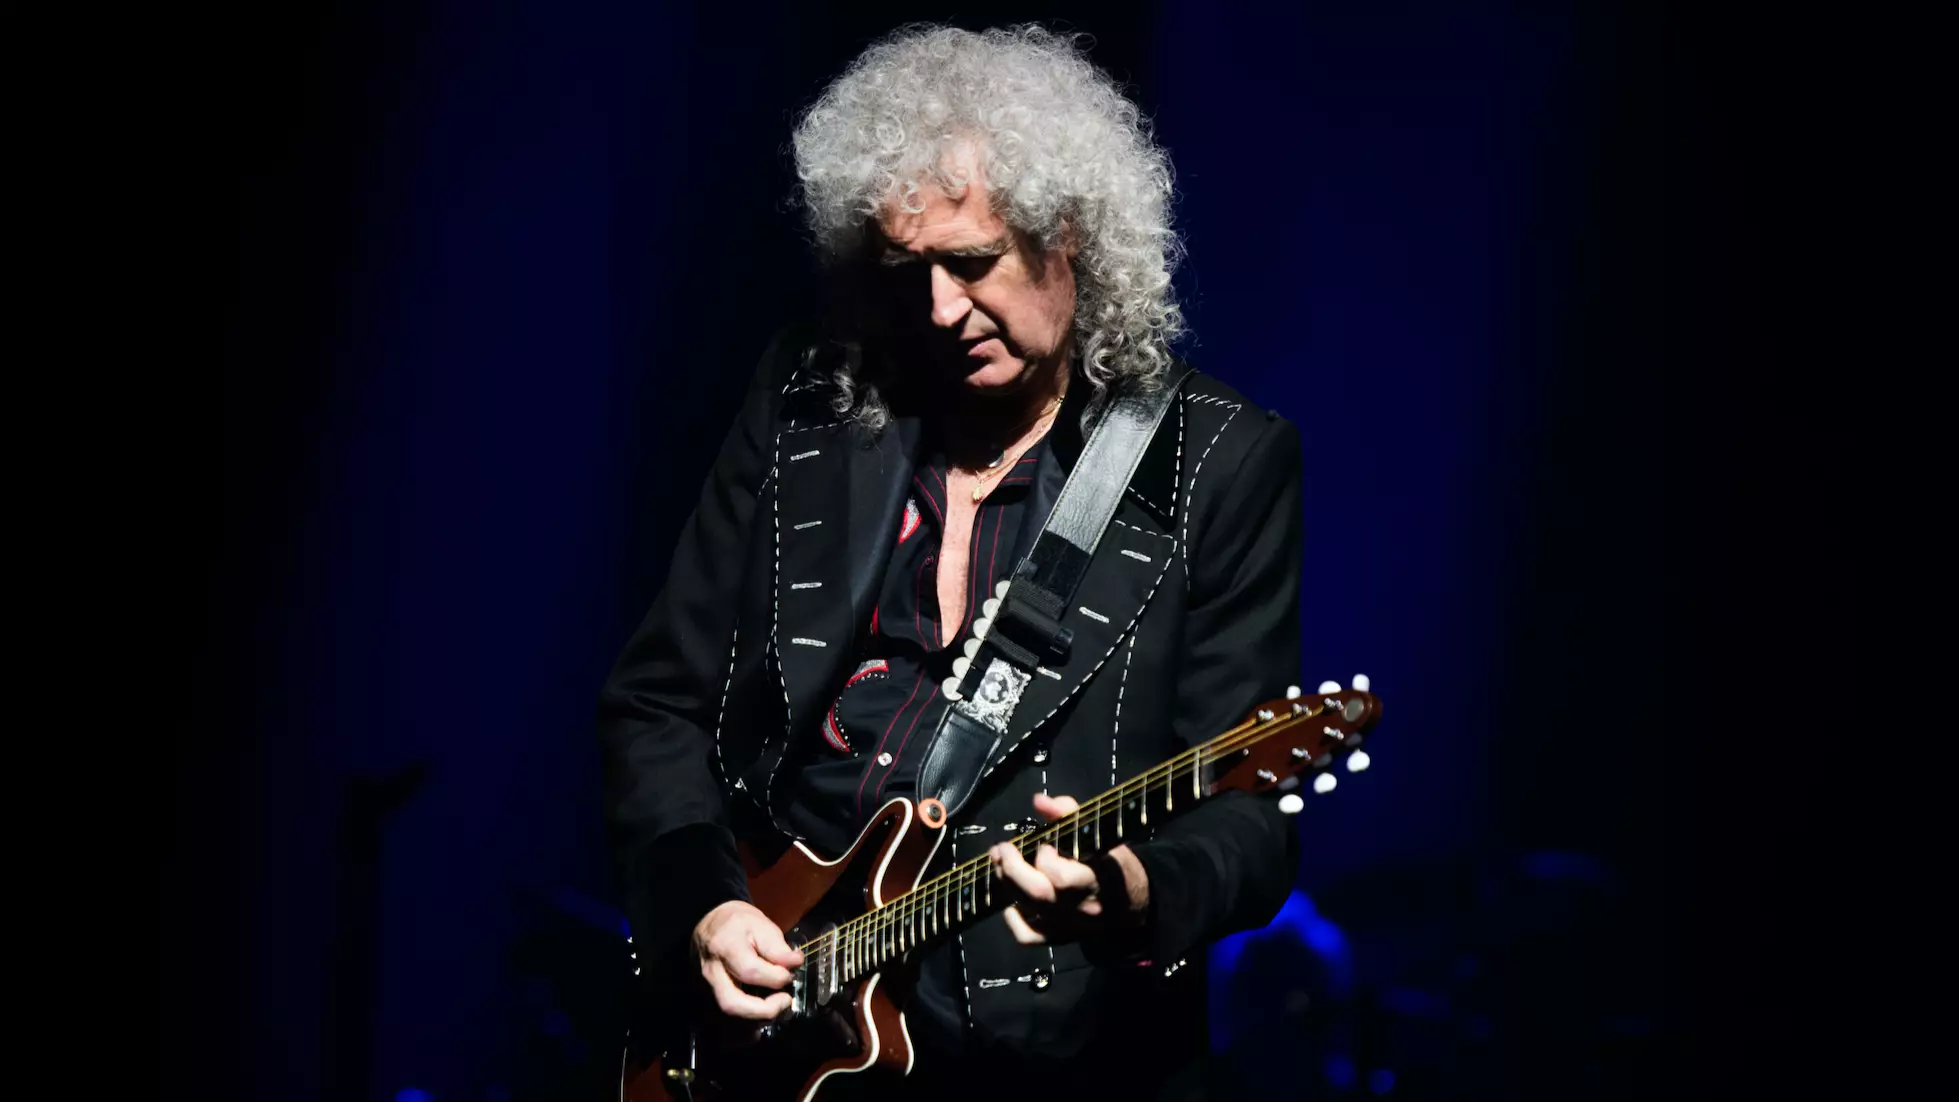 Queen Asked To Perform At Fire Fight Australia Benefit Gig For Bushfire Crisis